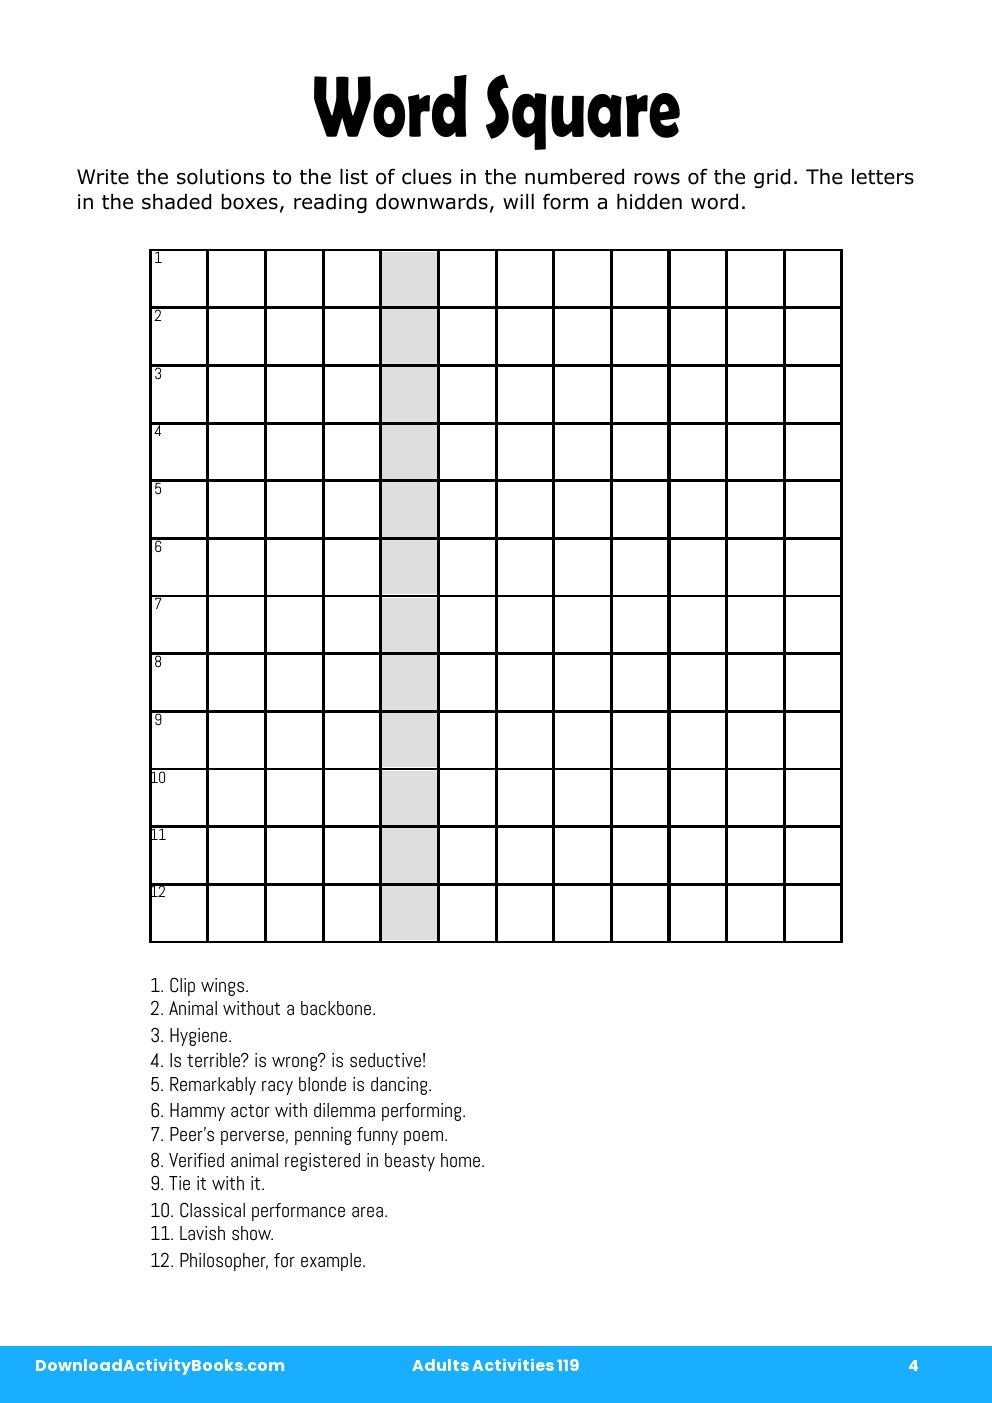 Word Square in Adults Activities 119